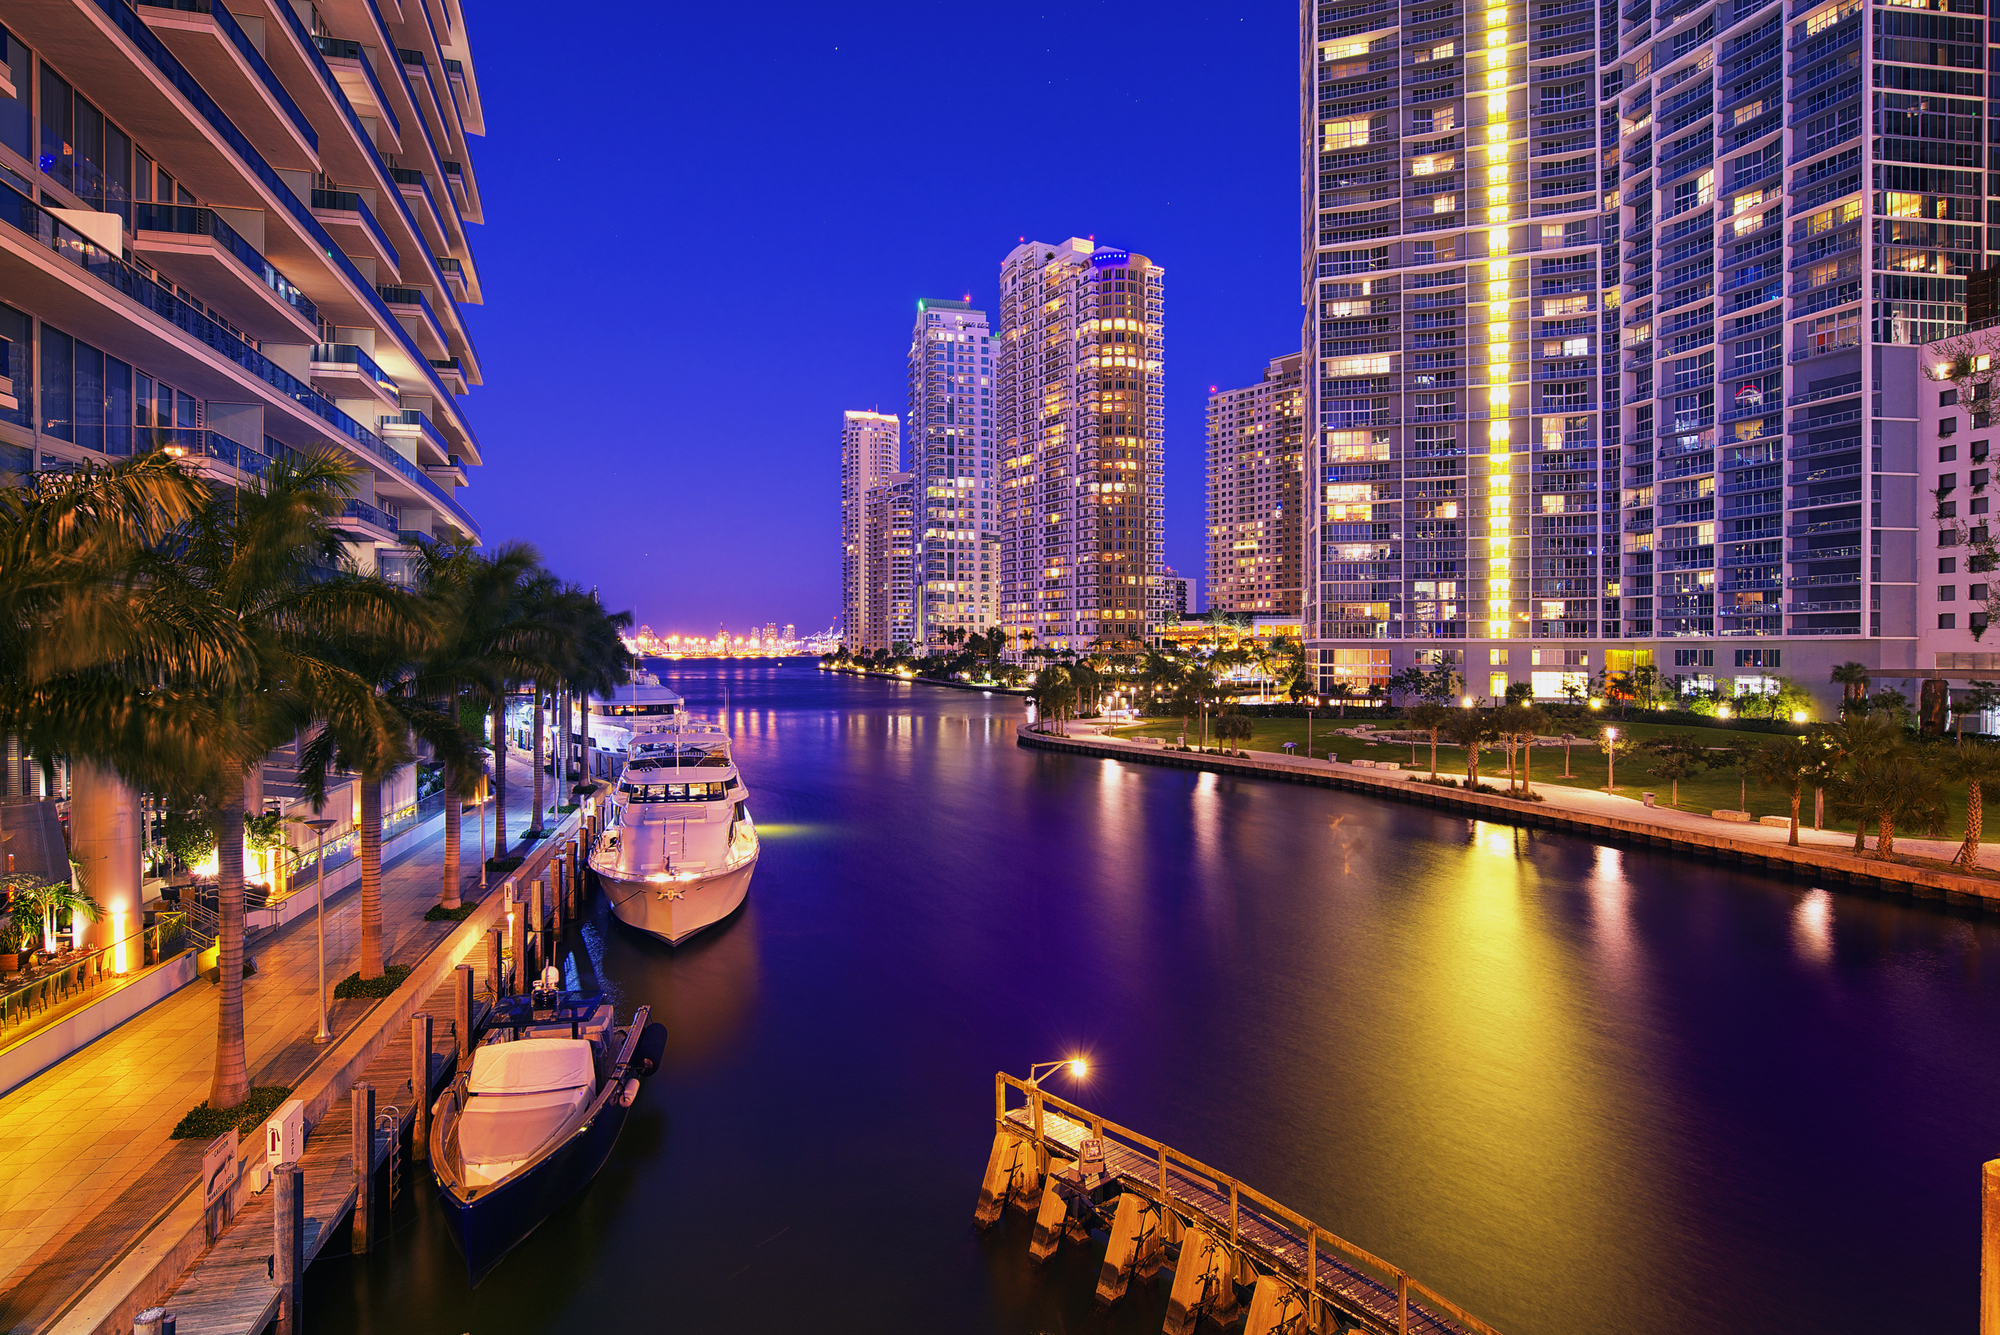 City illuminated over a canal in Miami Florida. 